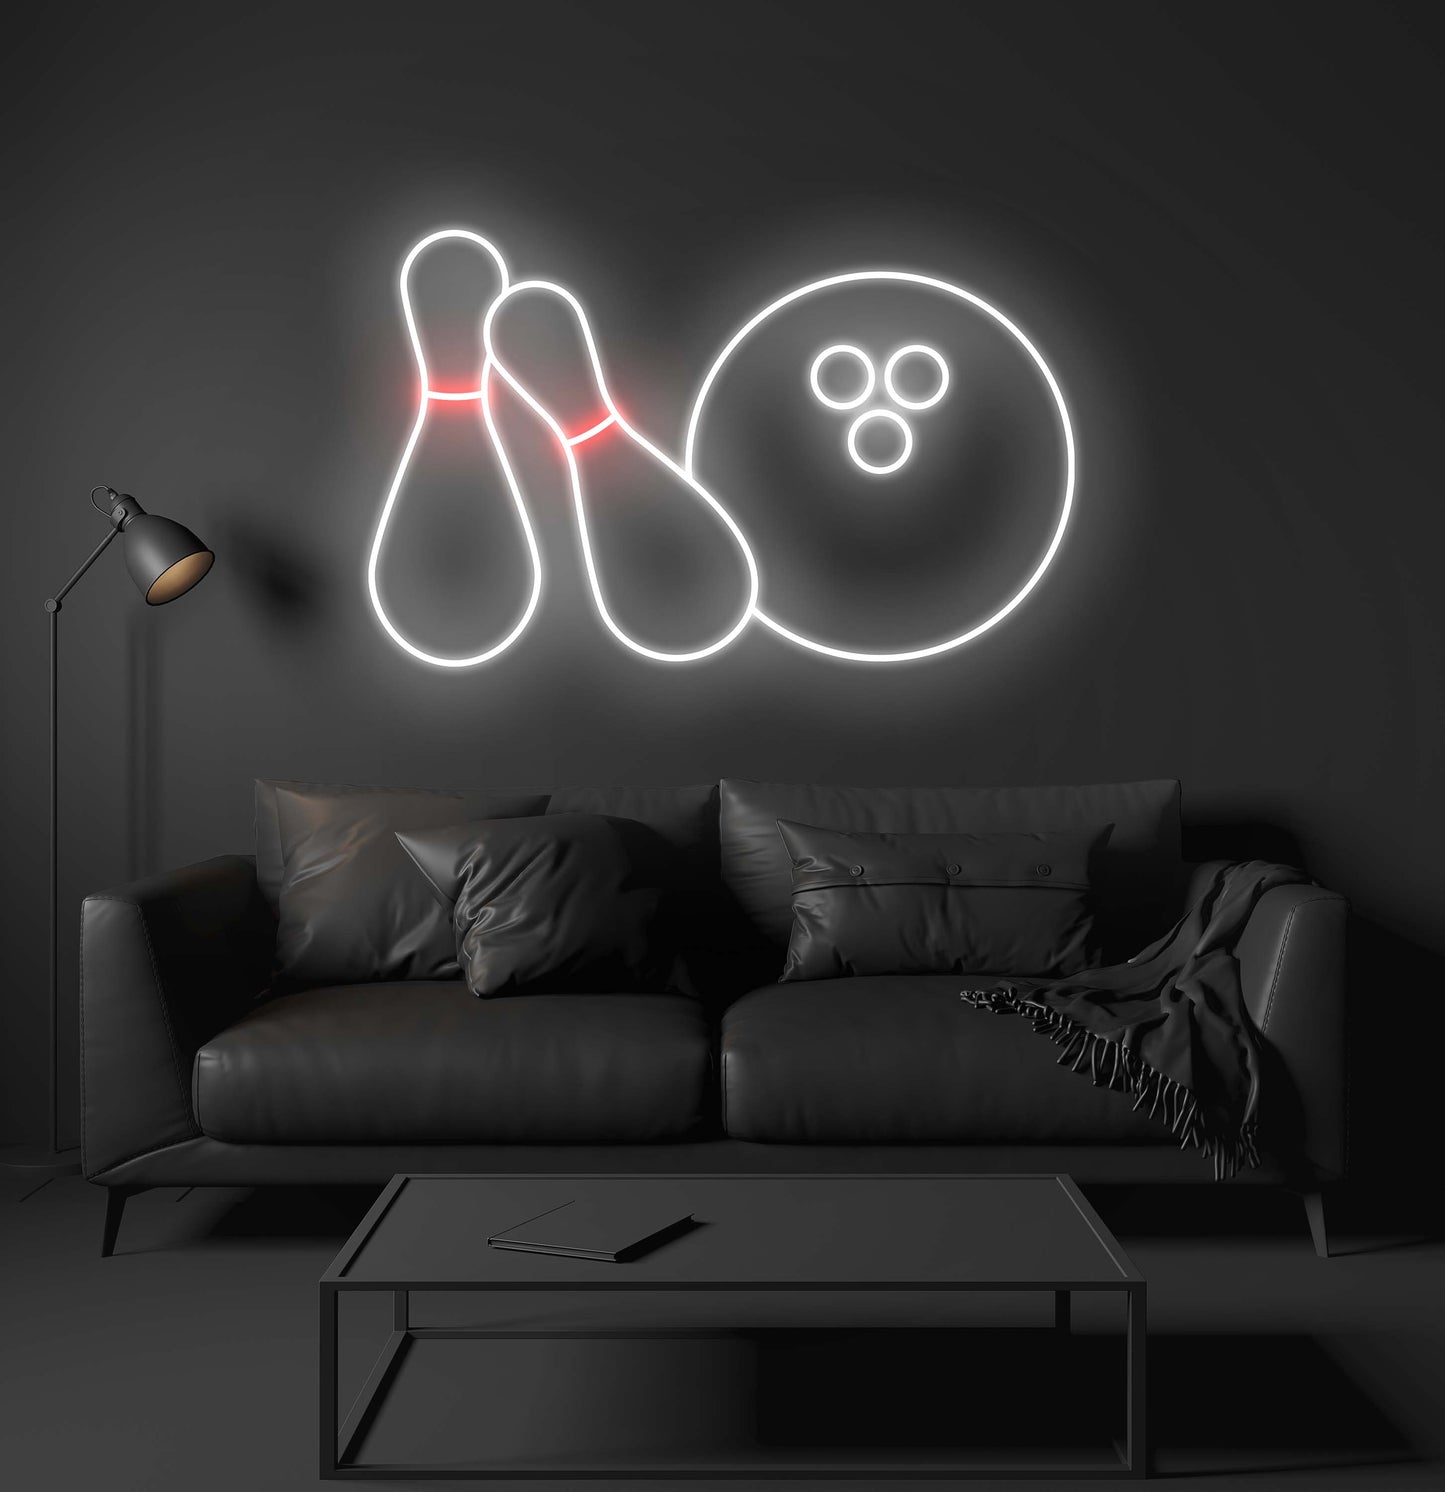 Bowling LED Neon Sign